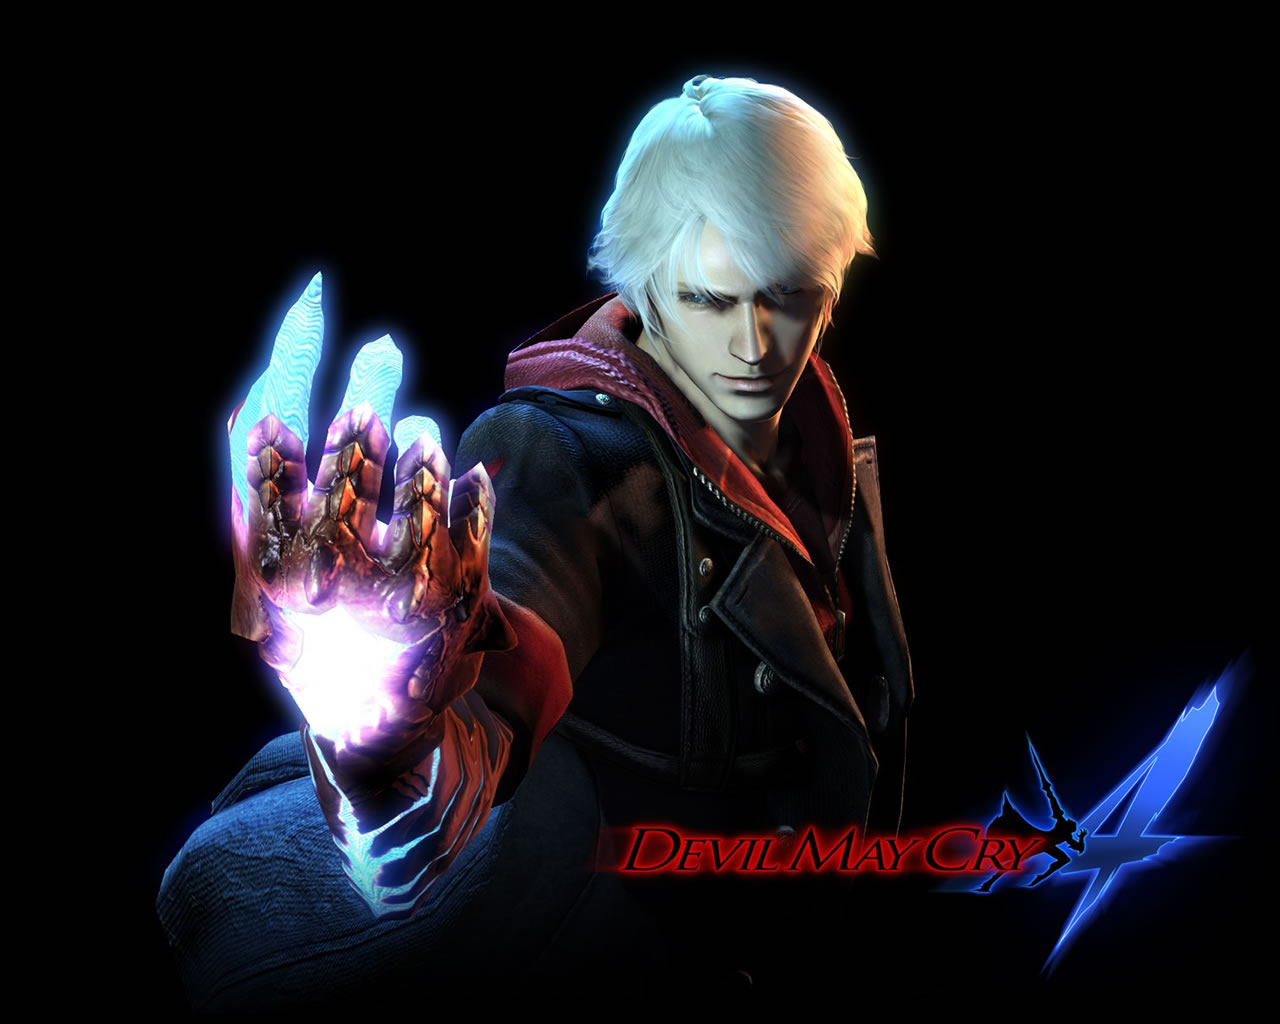 4(devil may cry 4)(ֽ9)